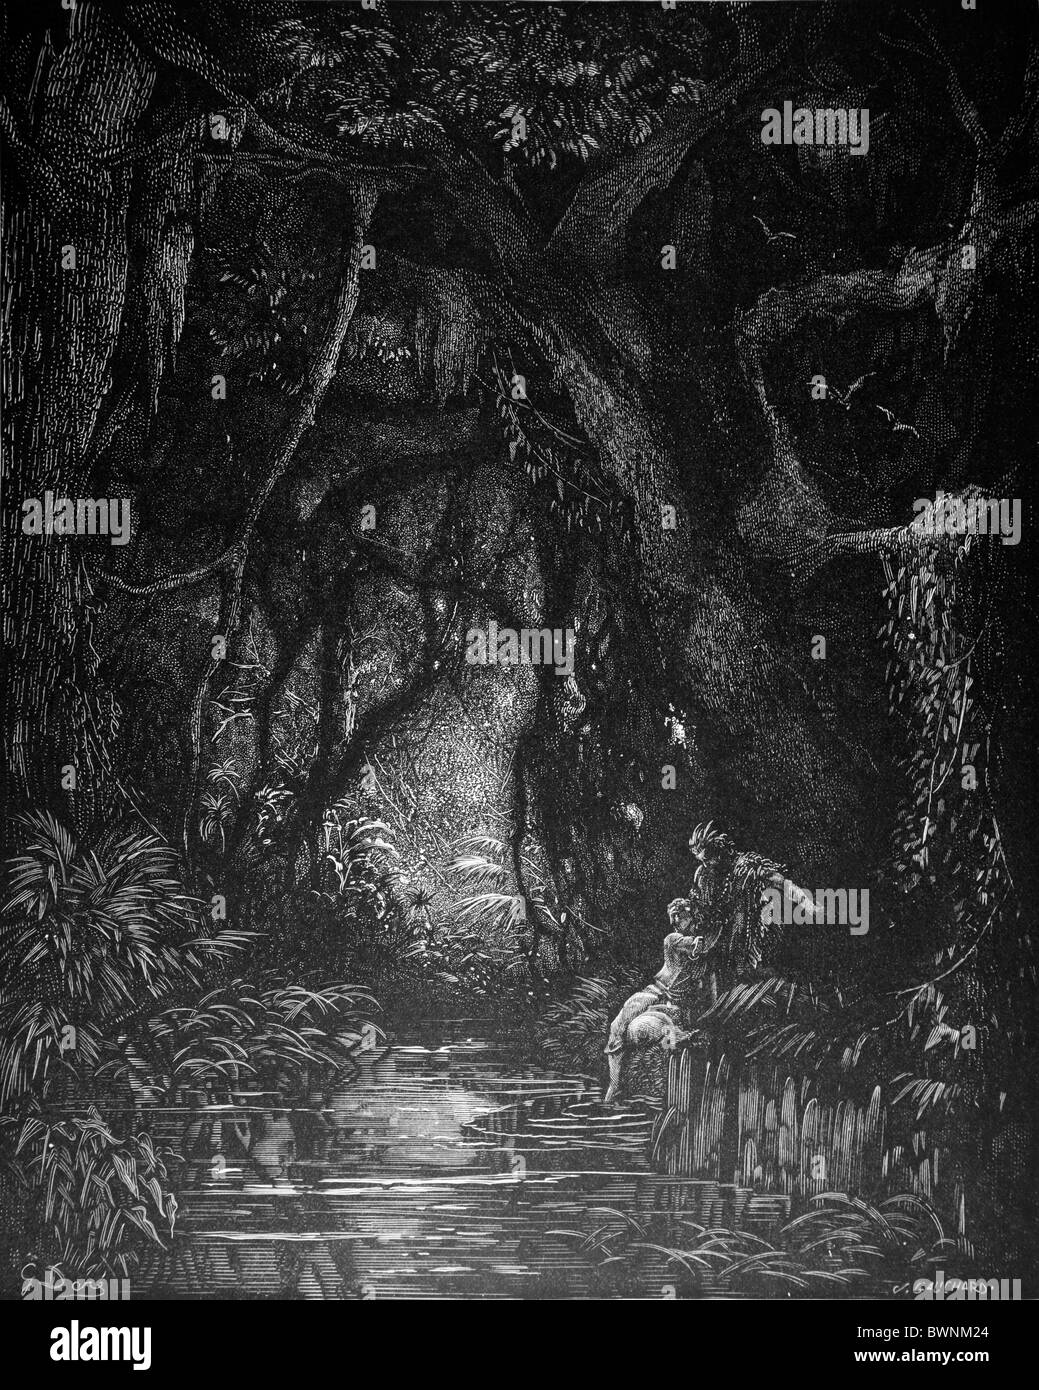 Gustave Doré; The Deep Mid Forest from Chactas and Atala, a novella by François-René de Chateaubriand; Black and White Engraving Stock Photo